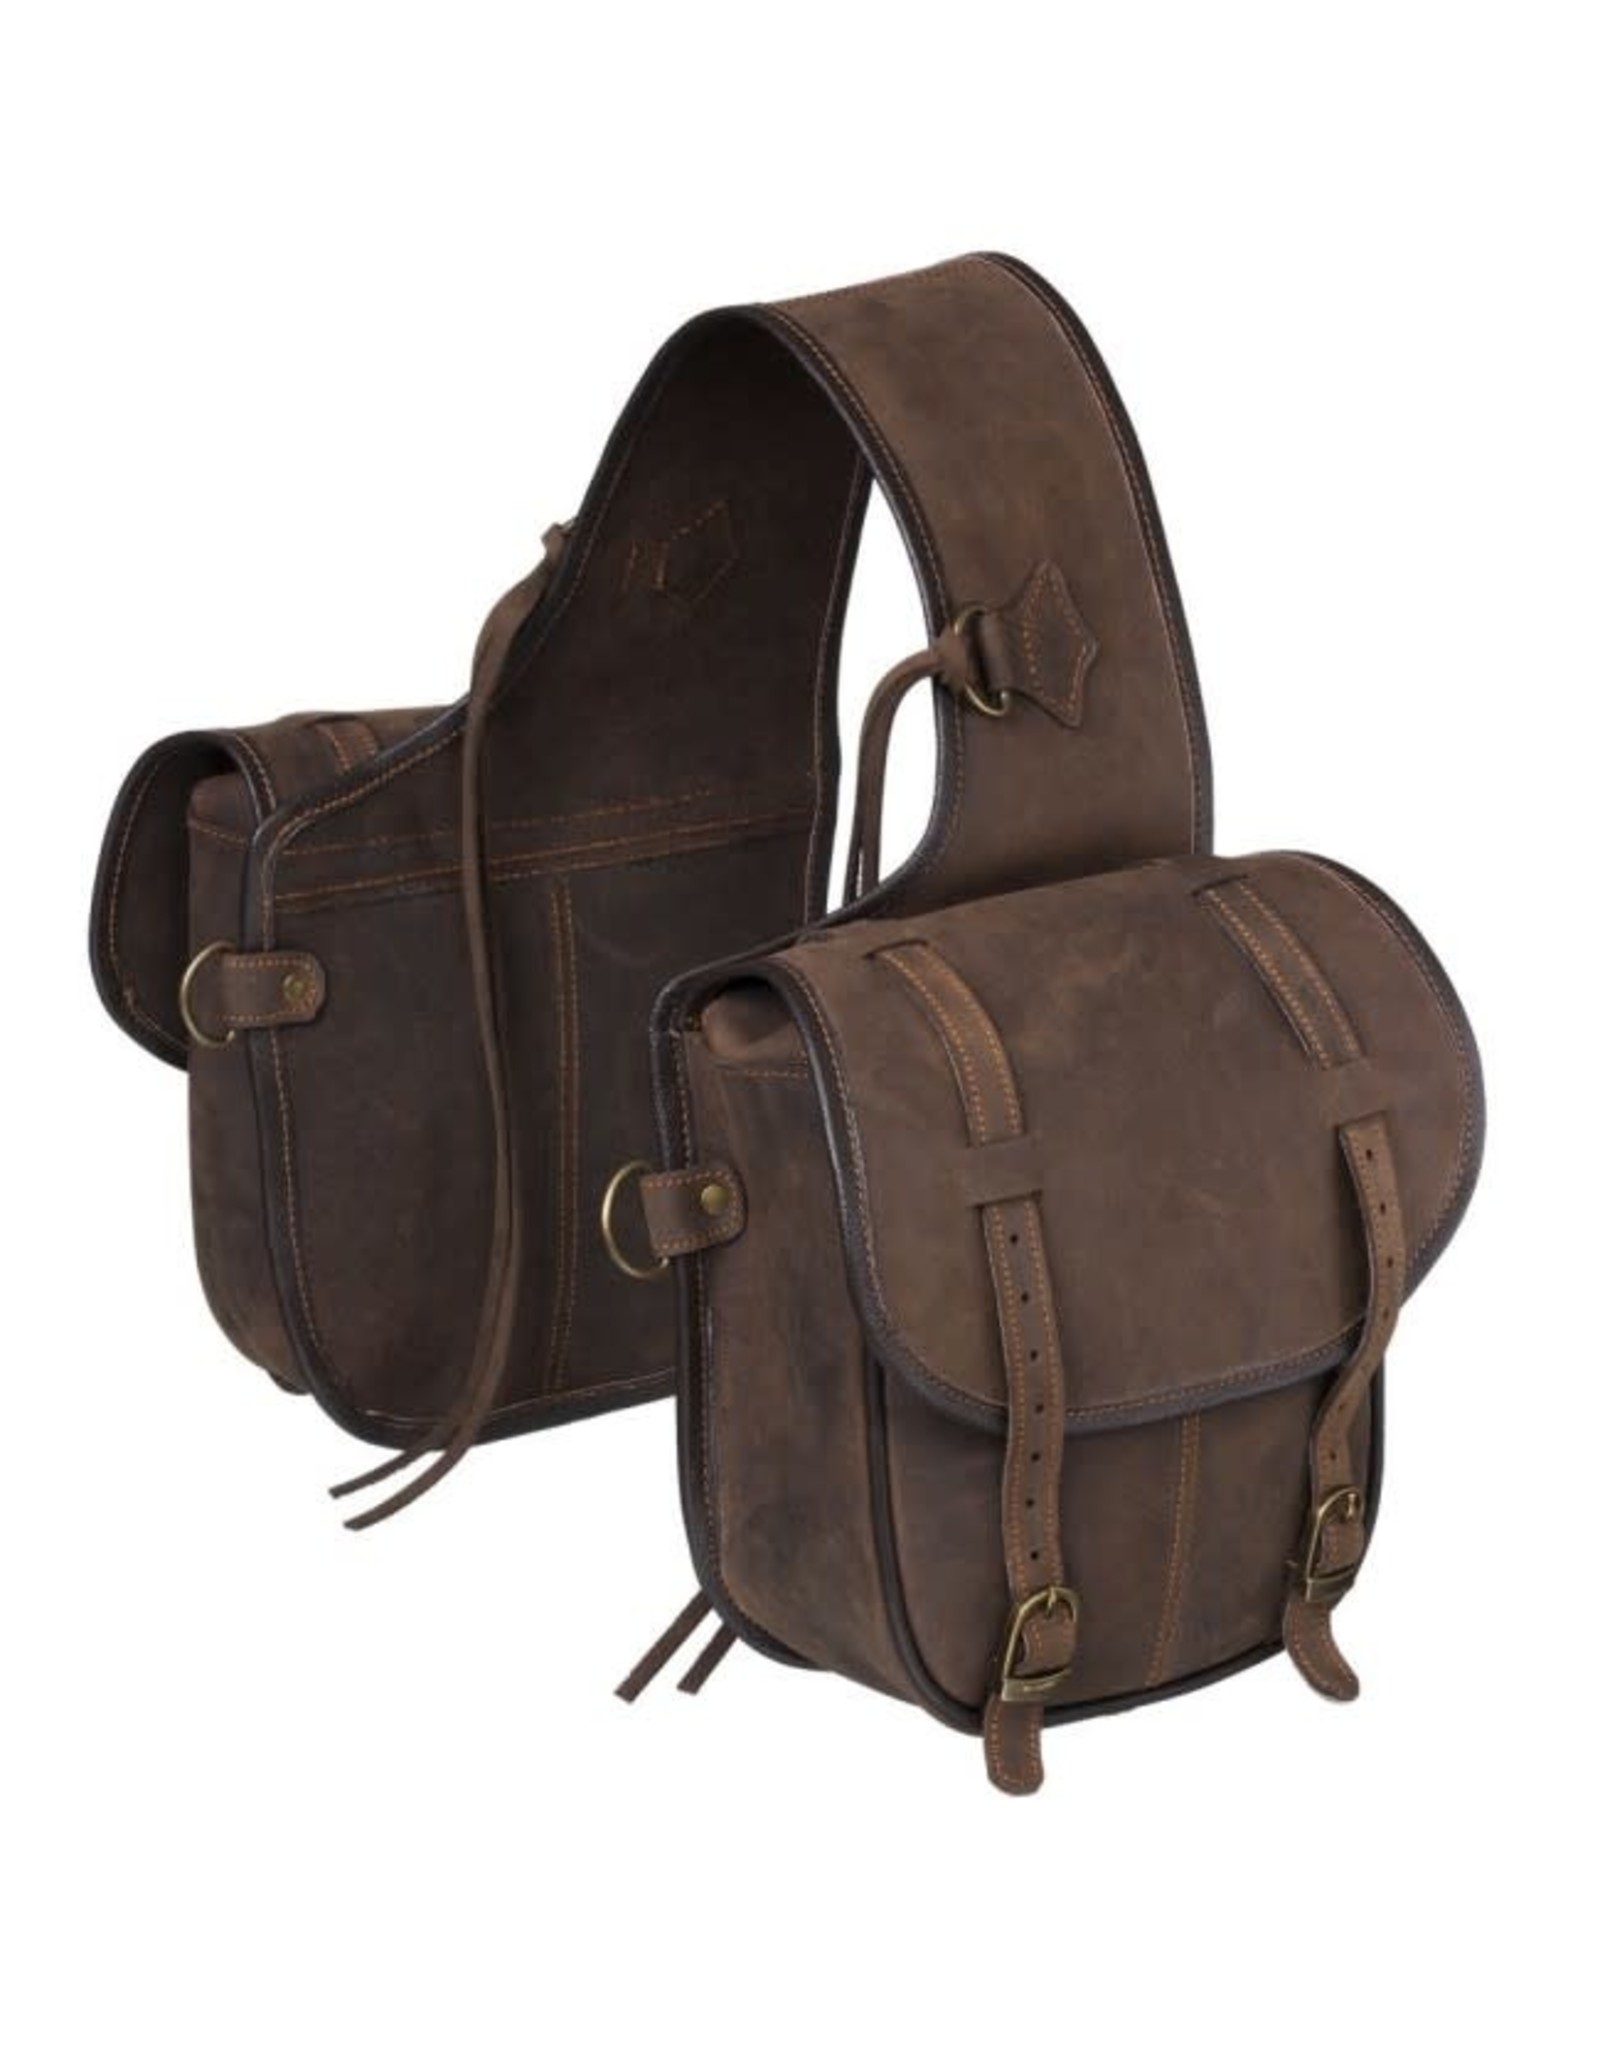 Tough 1 Soft Leather Cantle Bag